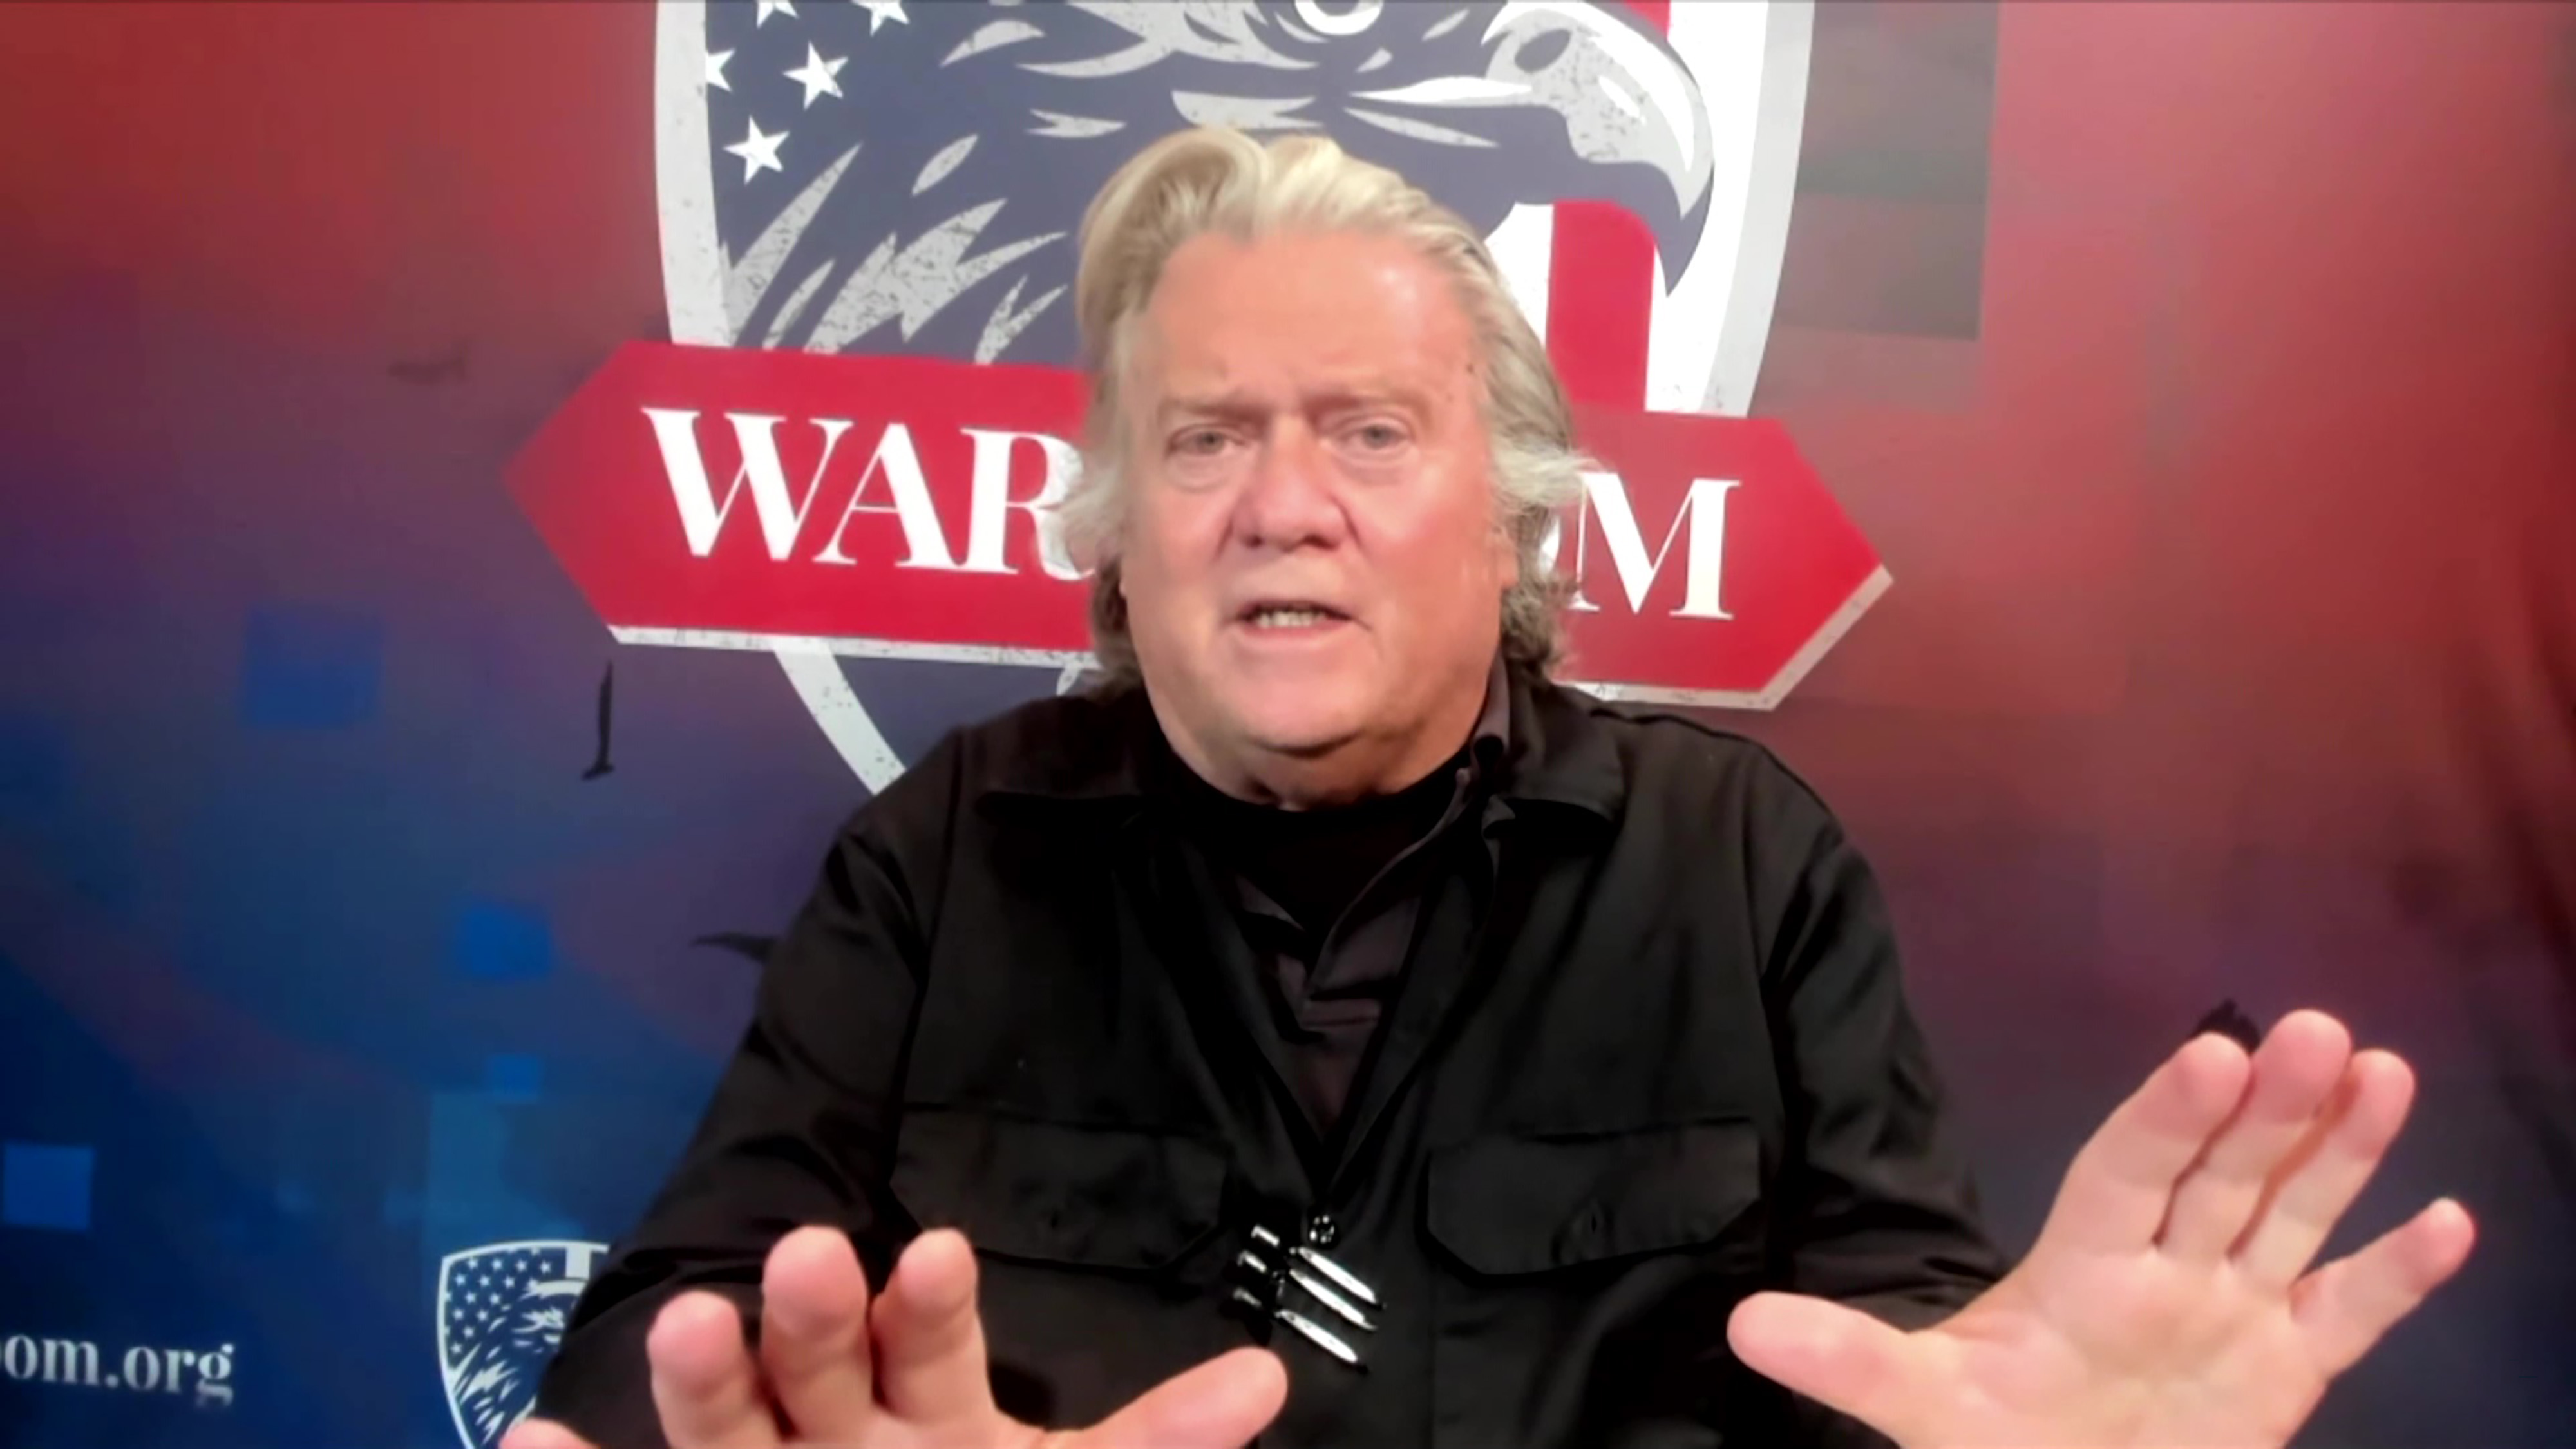 Donald Trump's chief strategist Bannon made some bold claims on the show